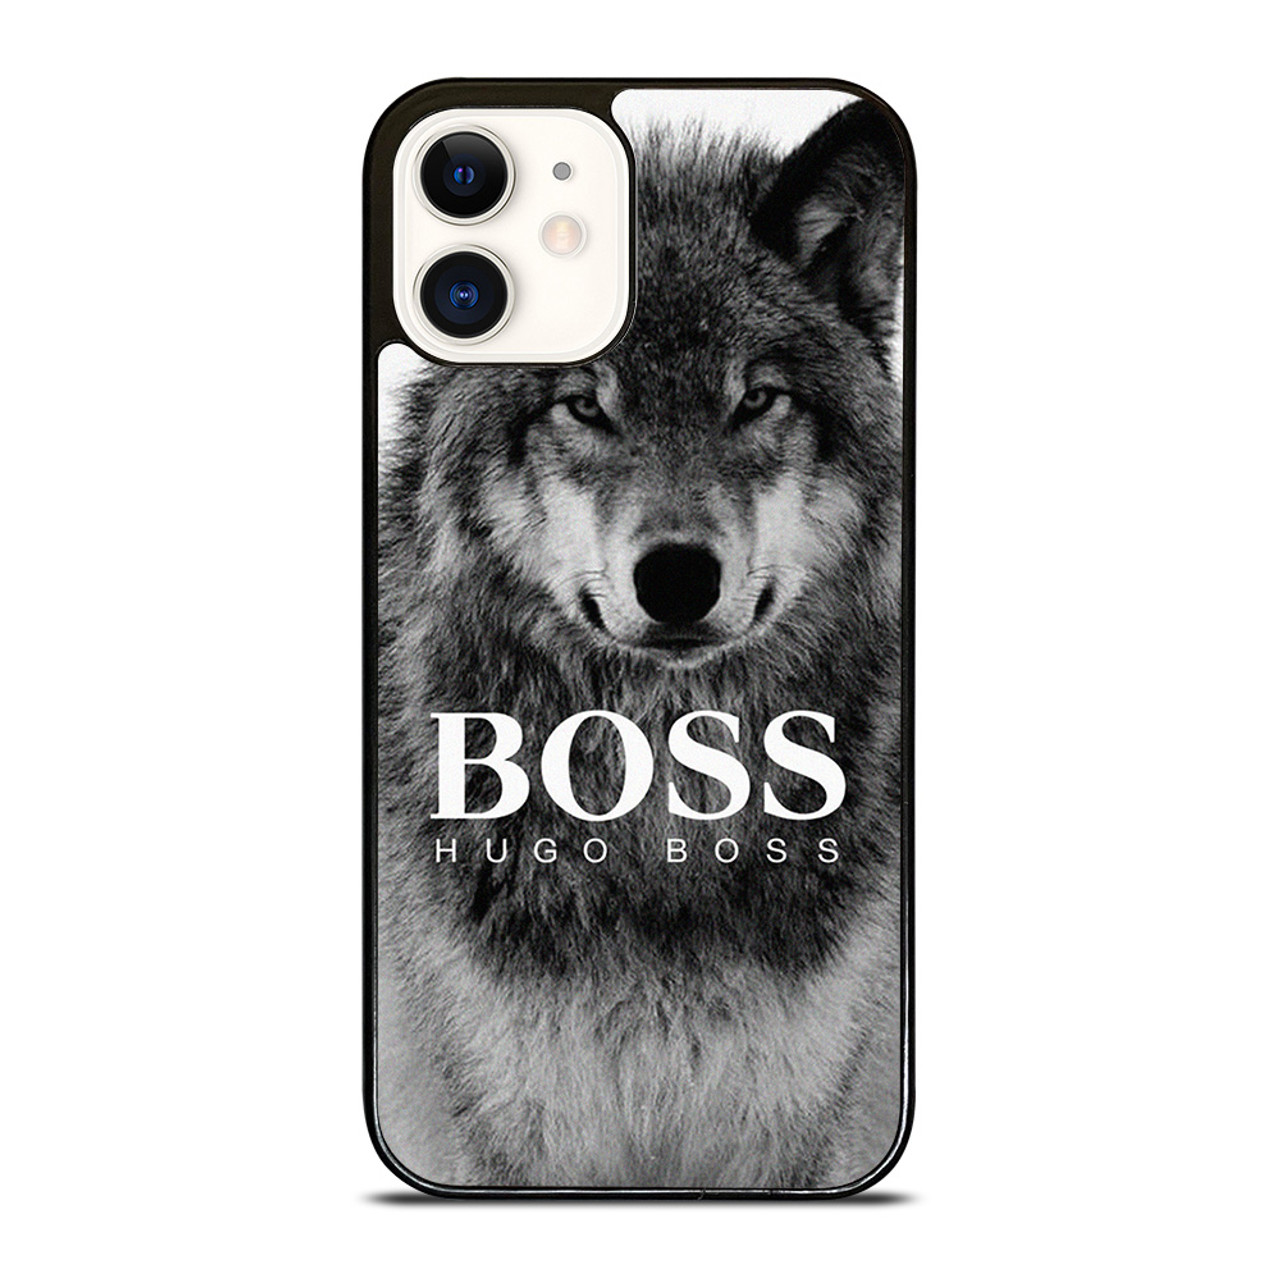 HUGO BOSS WOLF iPhone 12 Case Cover